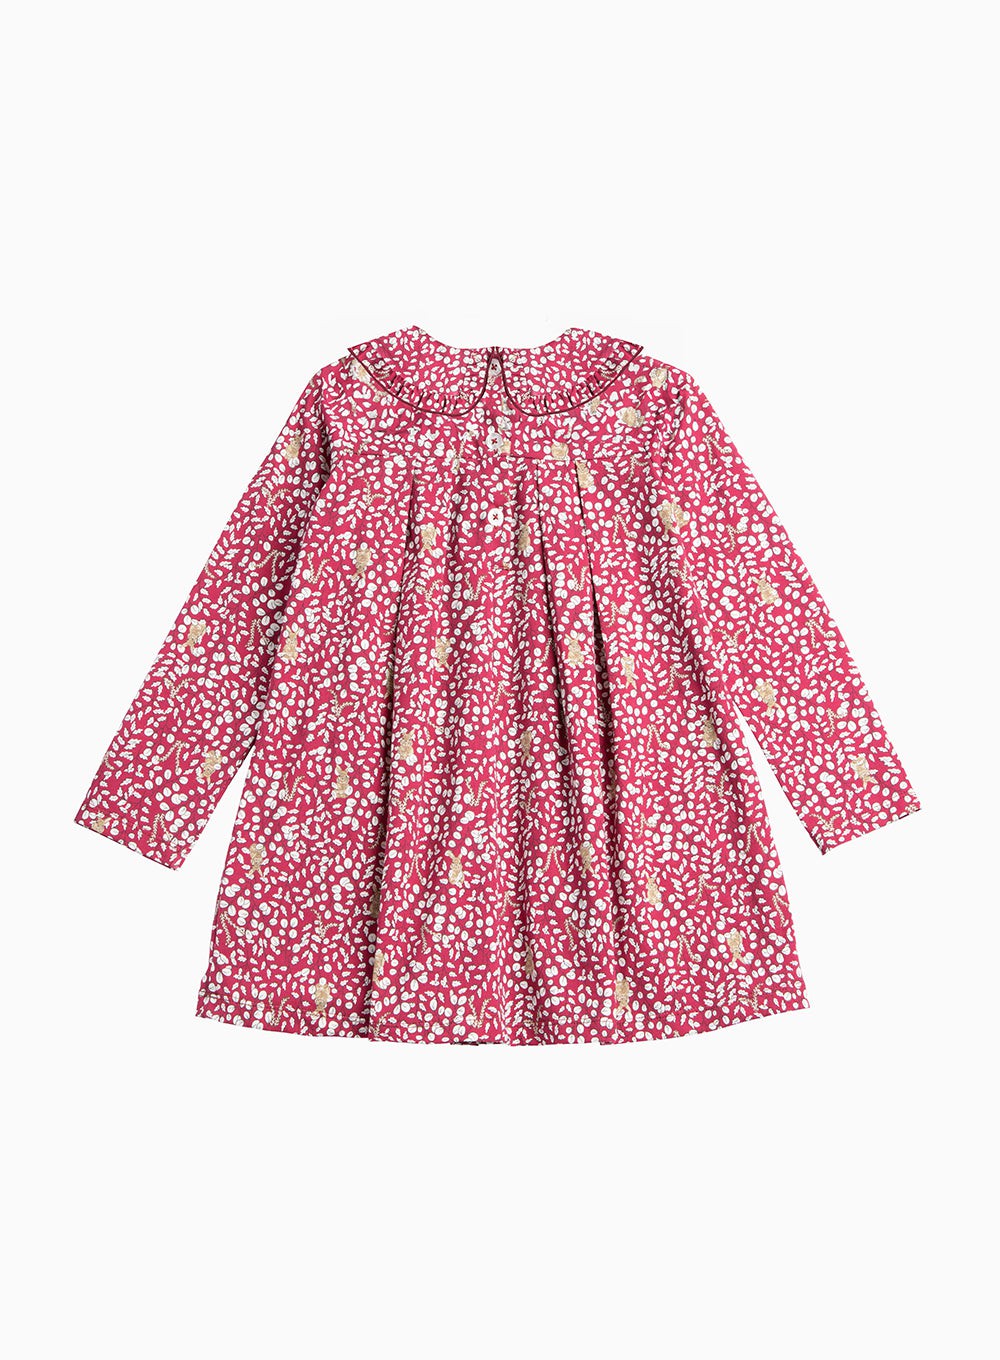 Confiture Girls' Woodland Bunny Jersey Dress in Berry | Trotters